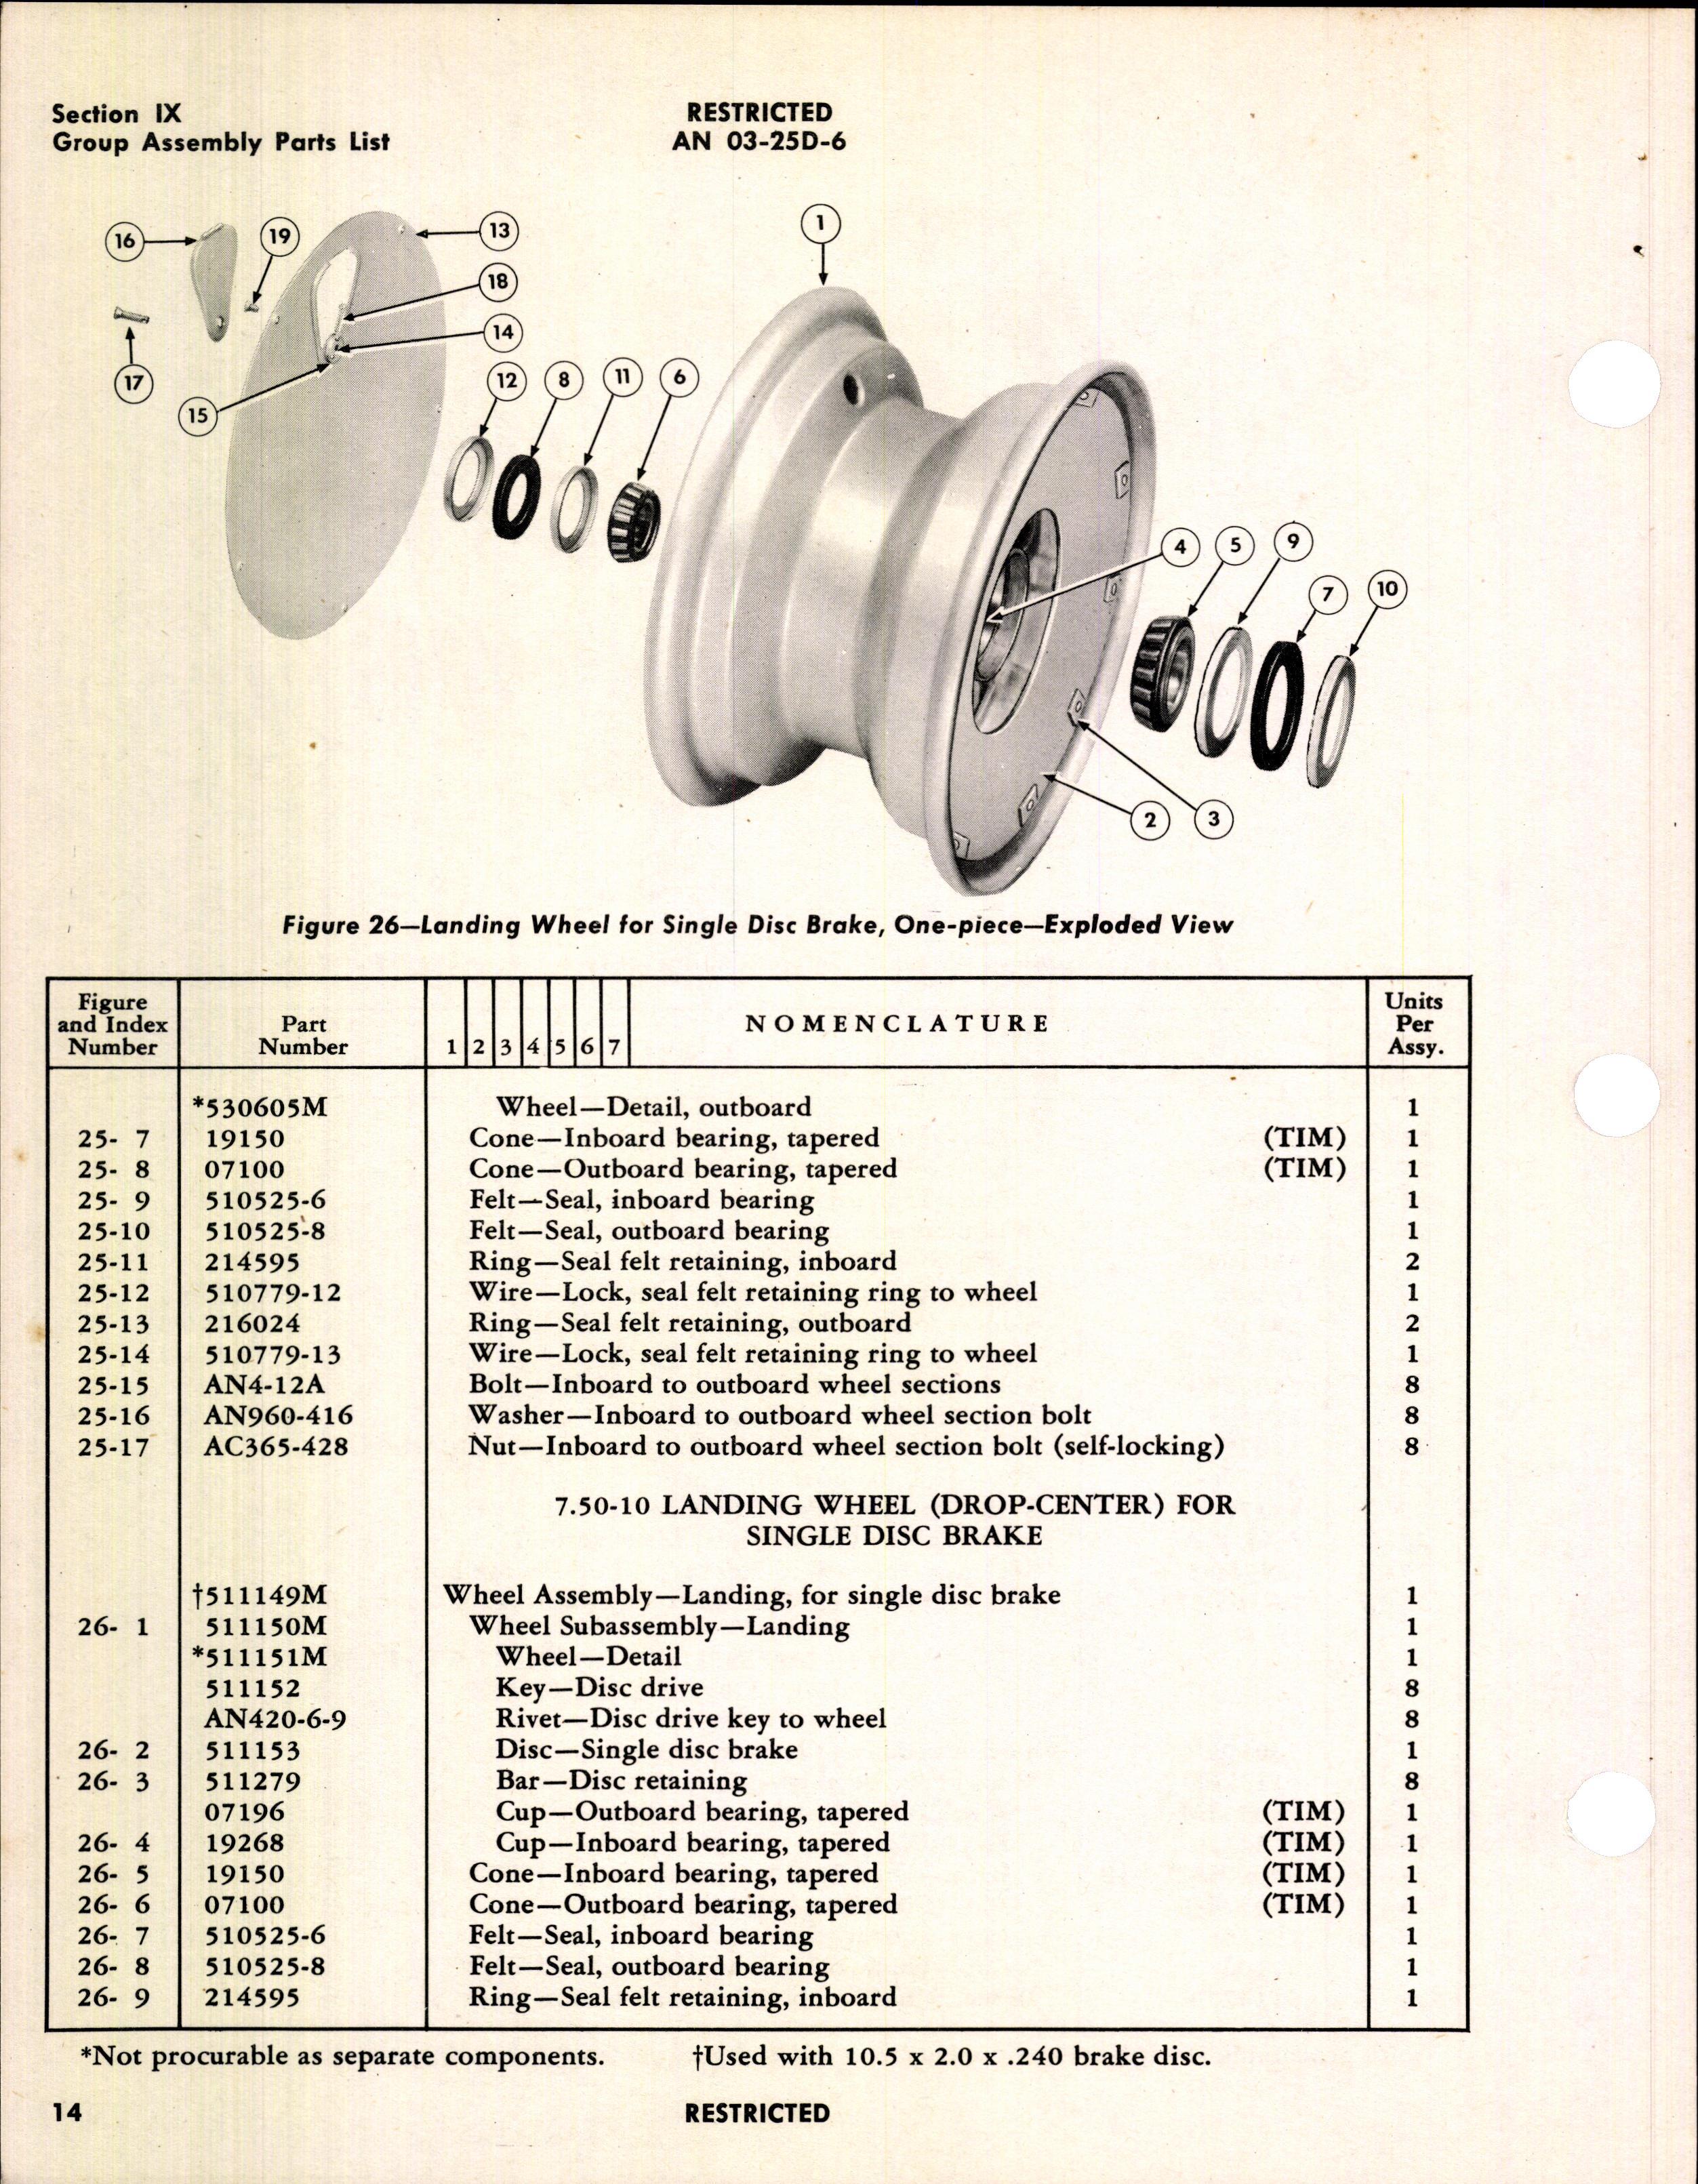 Sample page 22 from AirCorps Library document: Handbook of Instructions with Parts Catalog for Landing Wheels for use with Single Disc Brakes